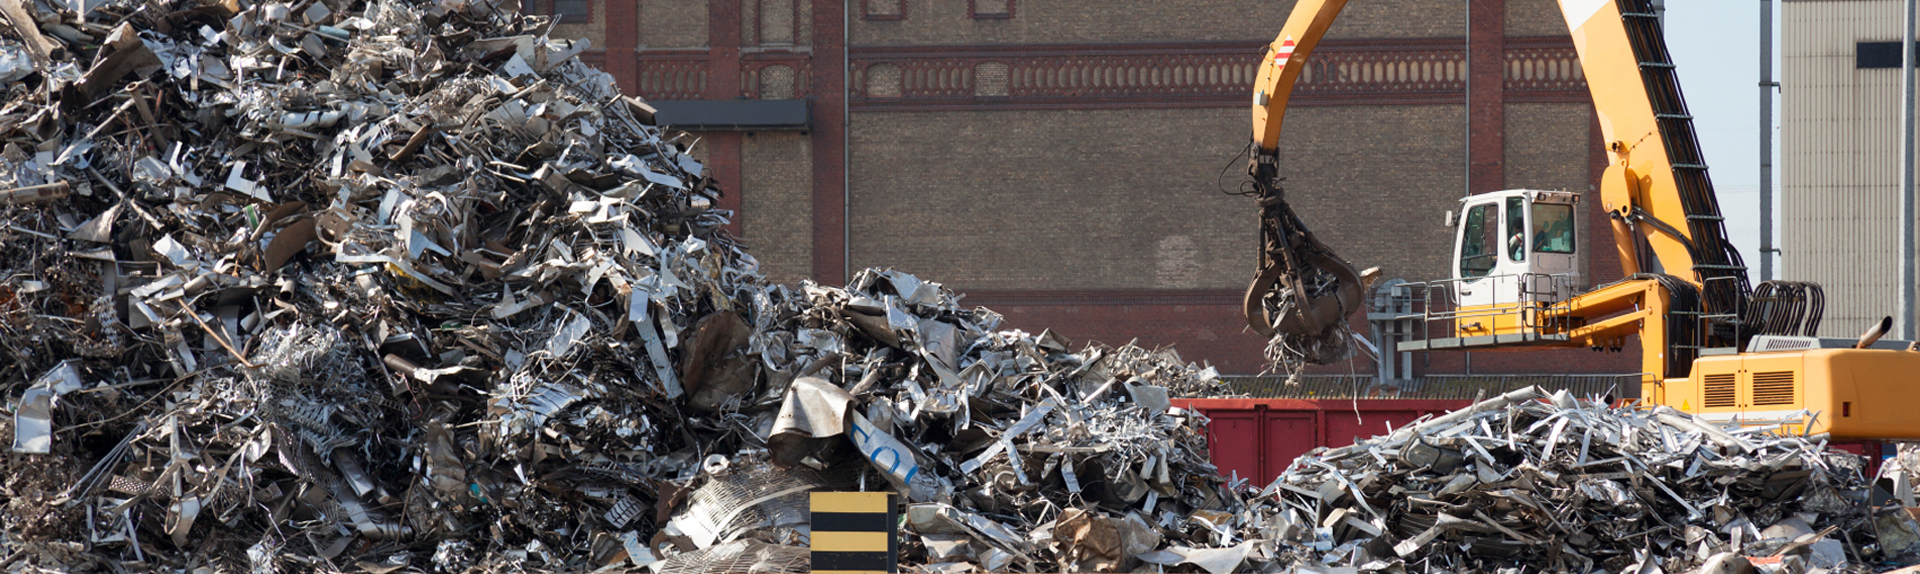 Ferrous metal recycling company in India